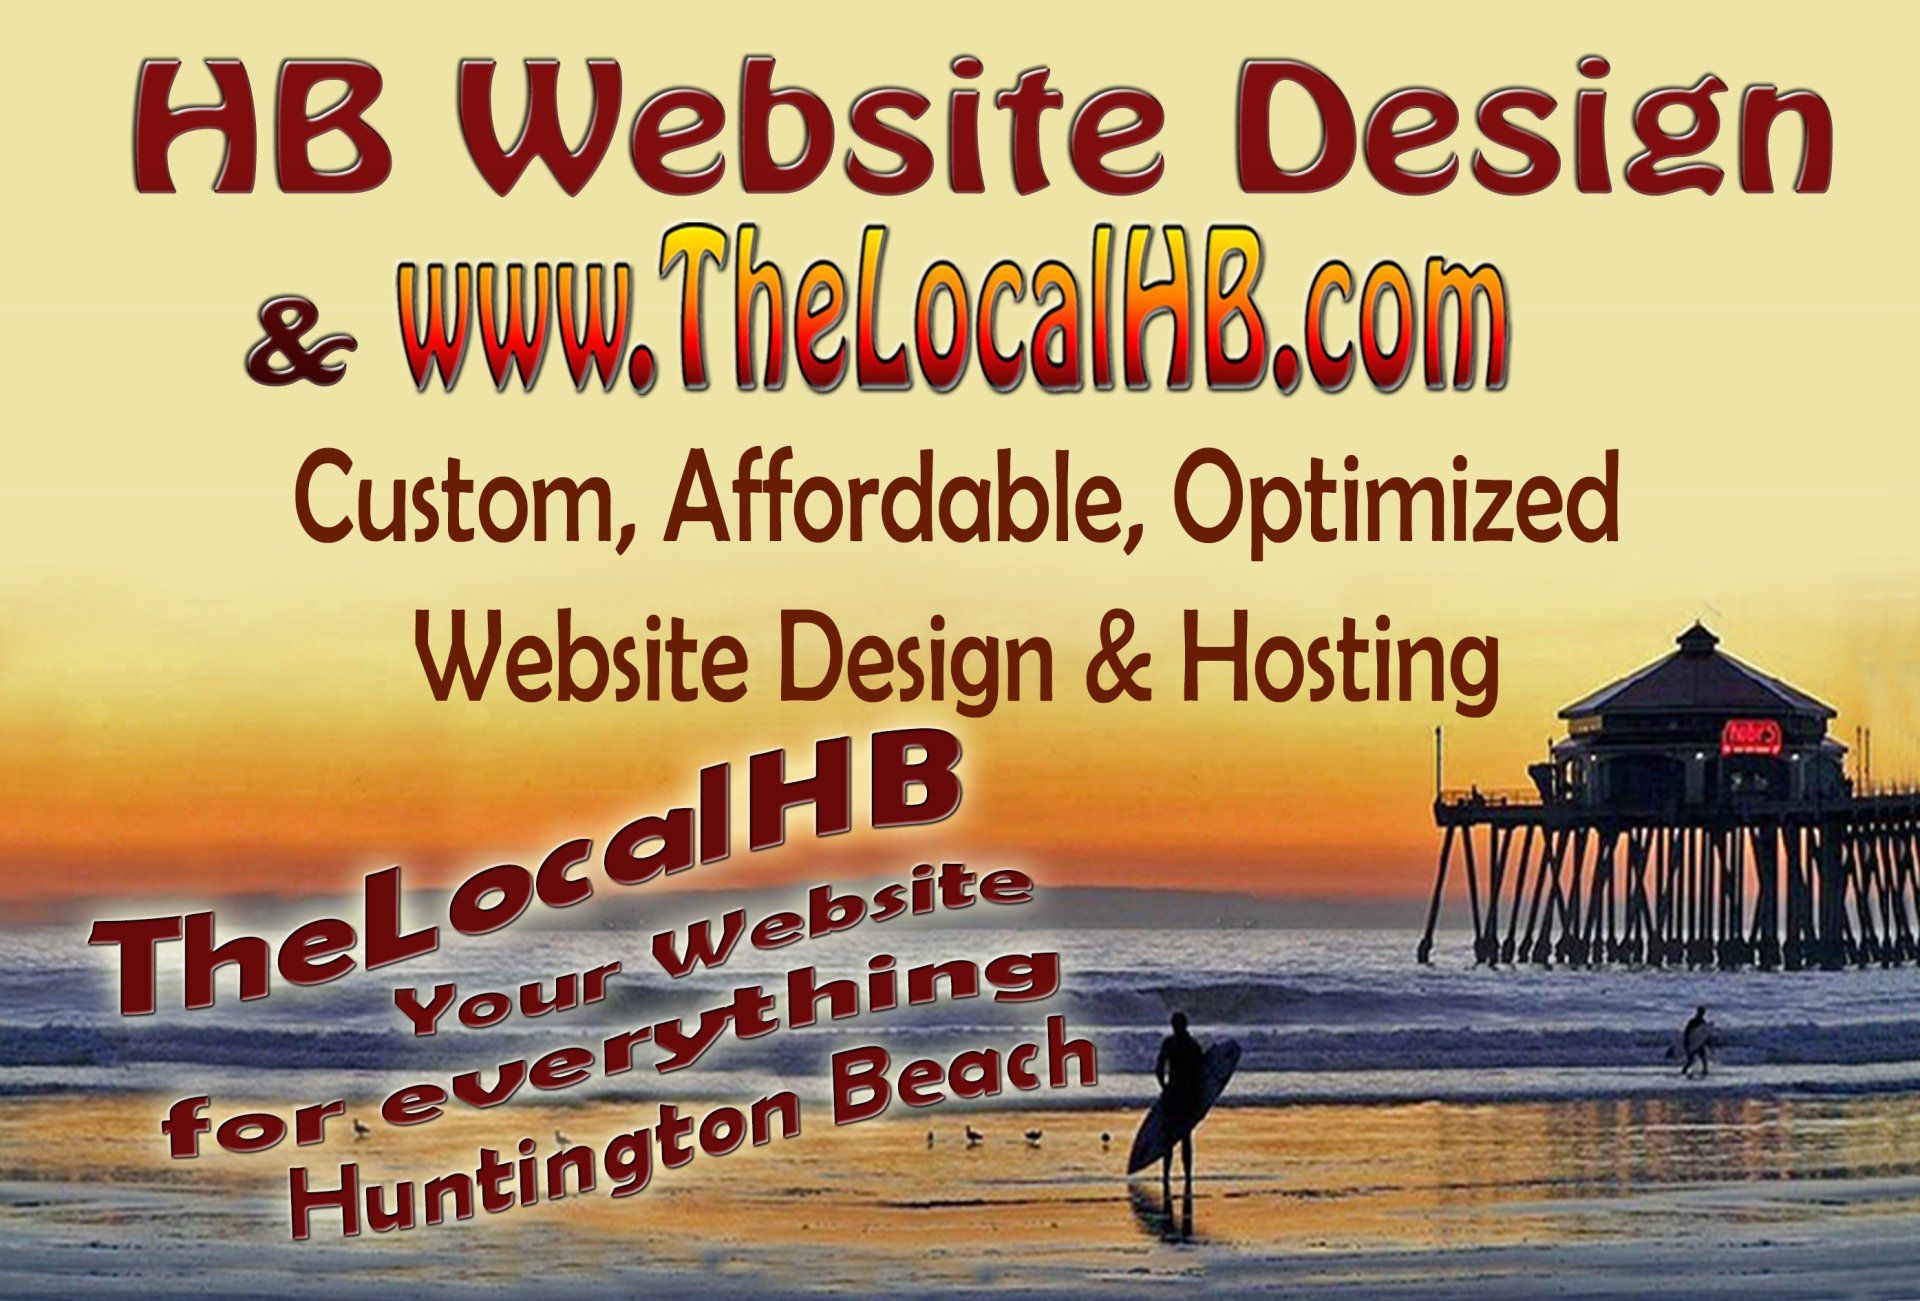 TheLocalHB - your website for everything Huntington Beach